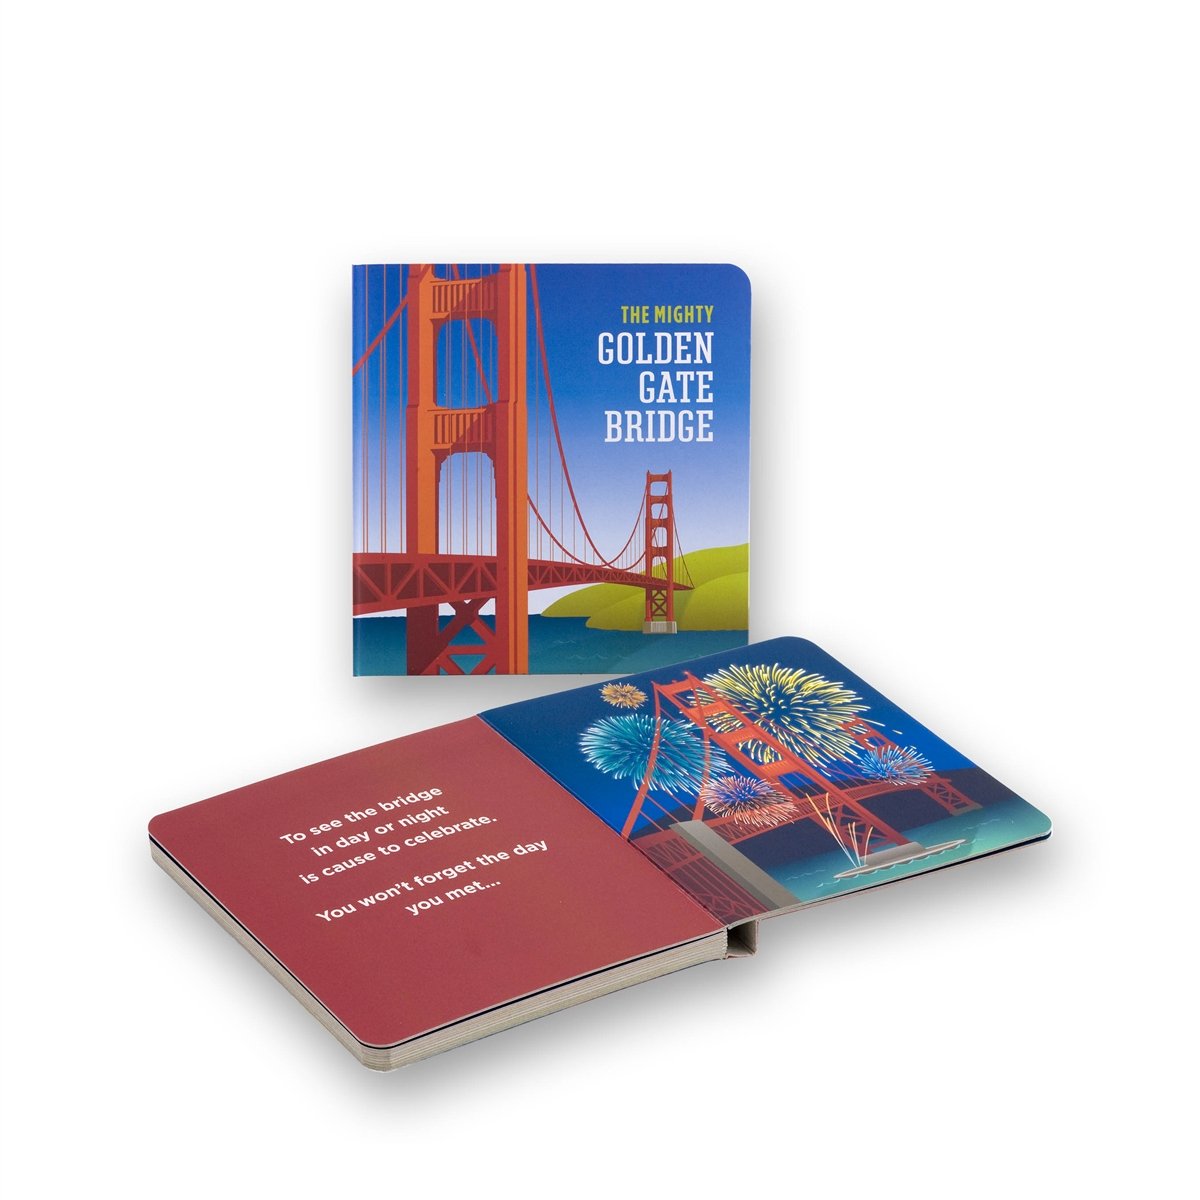 The Mighty Golden Gate Bridge board book with poem by Robert Lieber, story of San Francisco's beloved bridge.